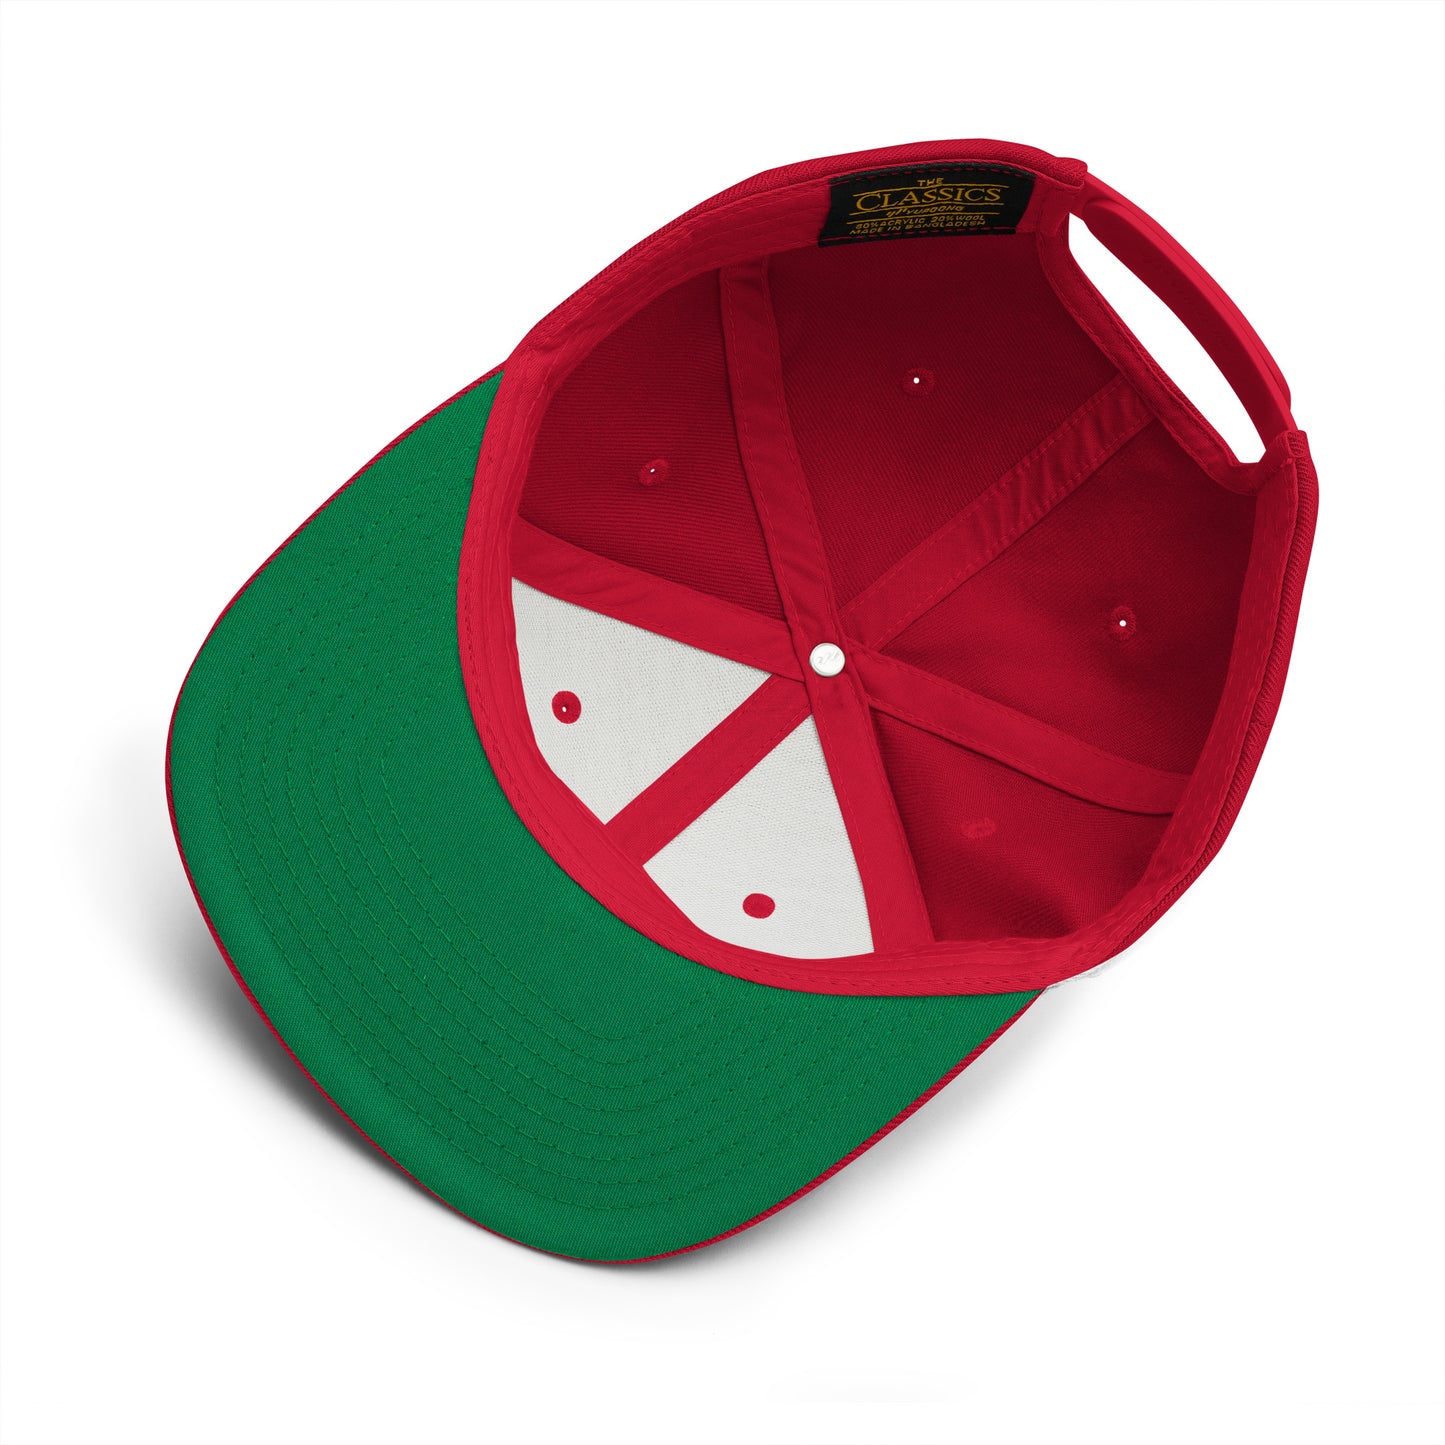 Red Neighbor Snapback Hat - Comedy the Brand - Stand-Up Comedy Fan Gear